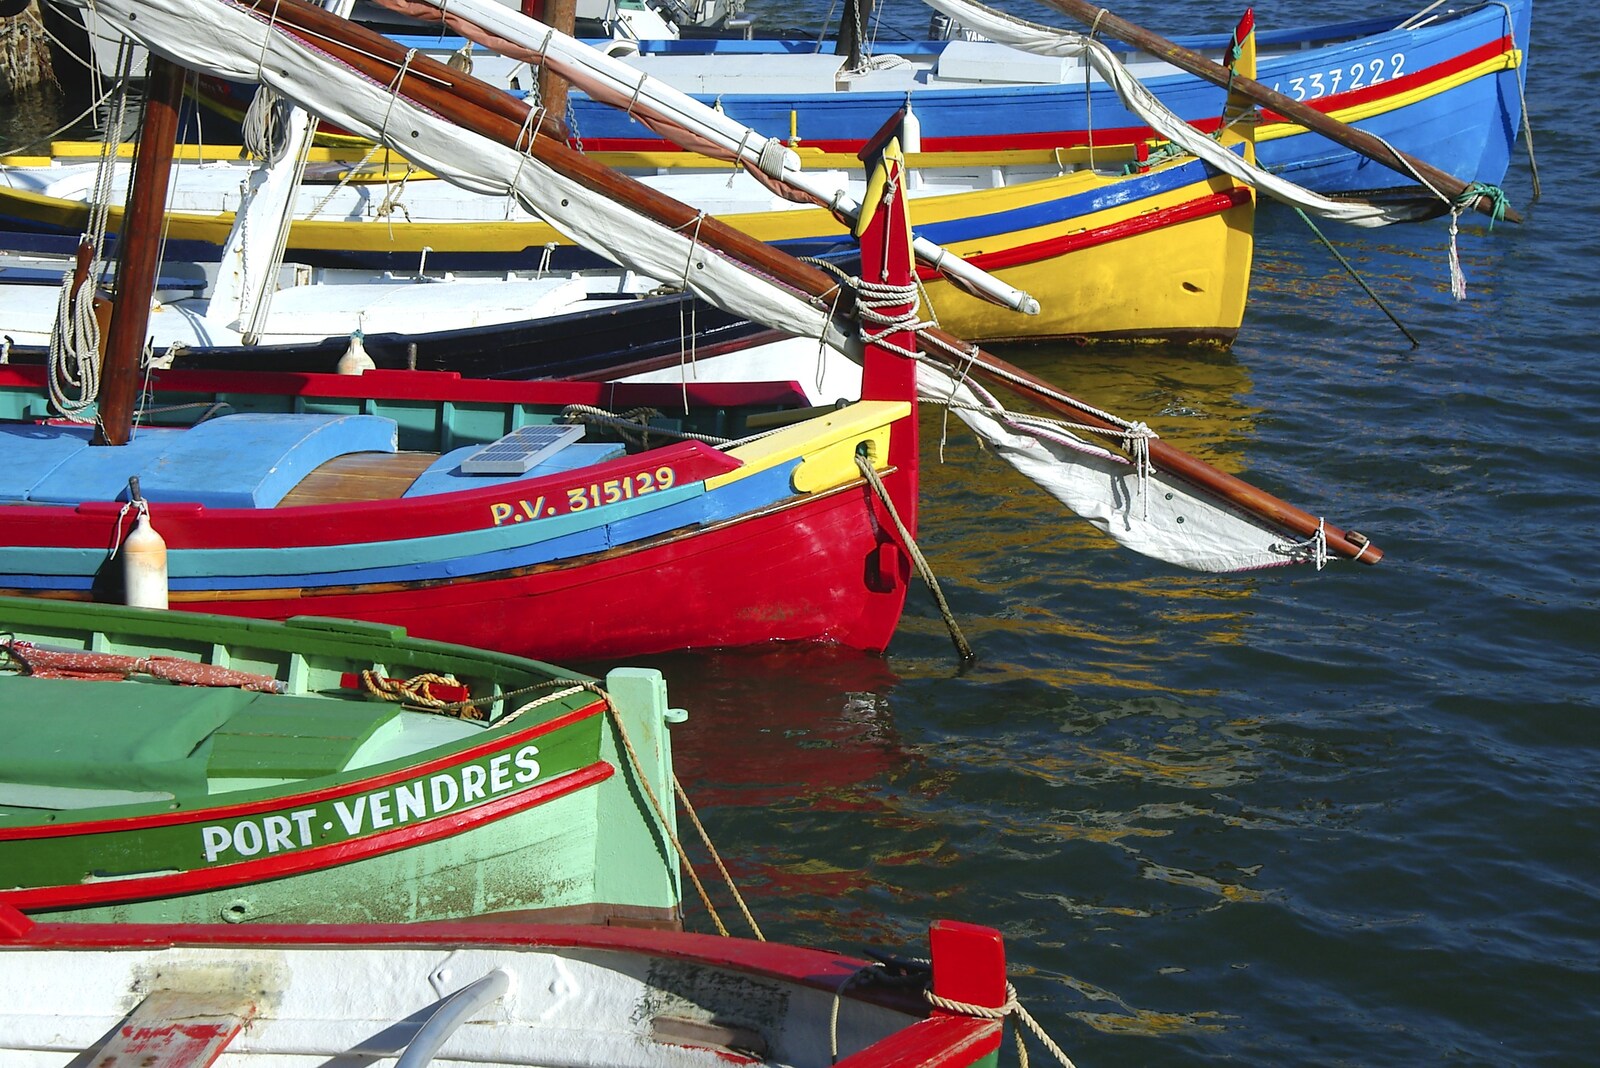 Colourful boats in the harbour from The Colourful Boats of Collioure, France - 20th September 2006